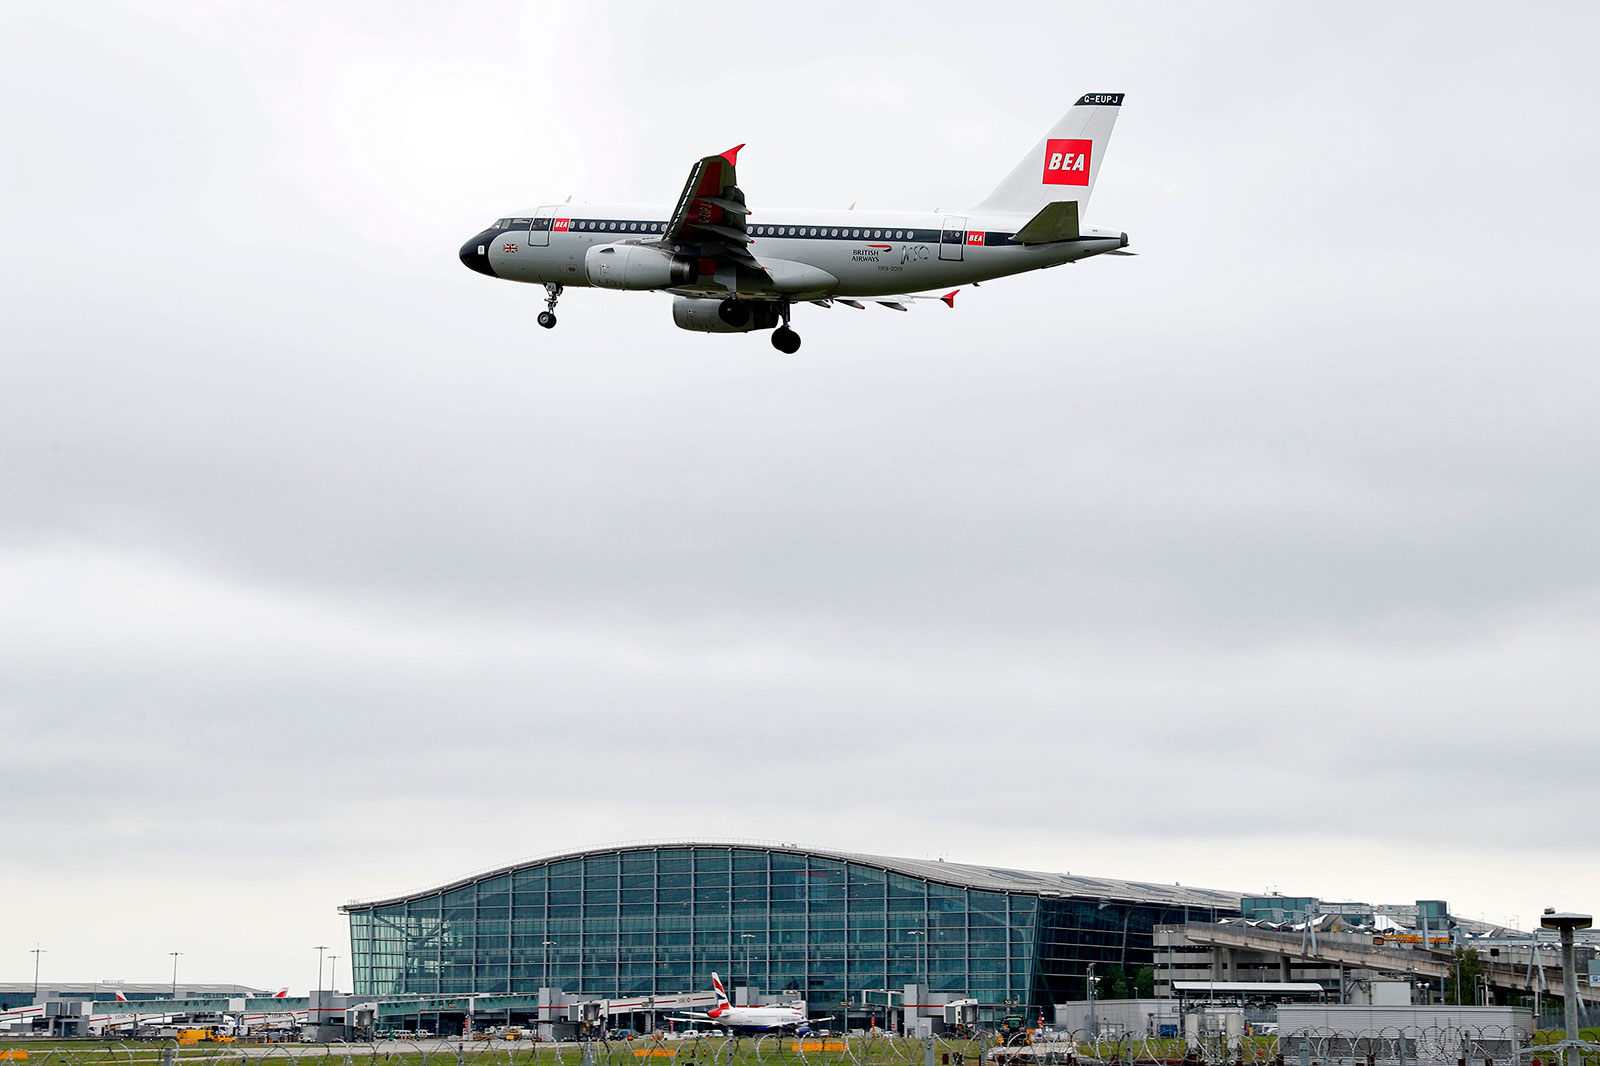 A British Airways plane lands at London Heathrow Airport on May 10.